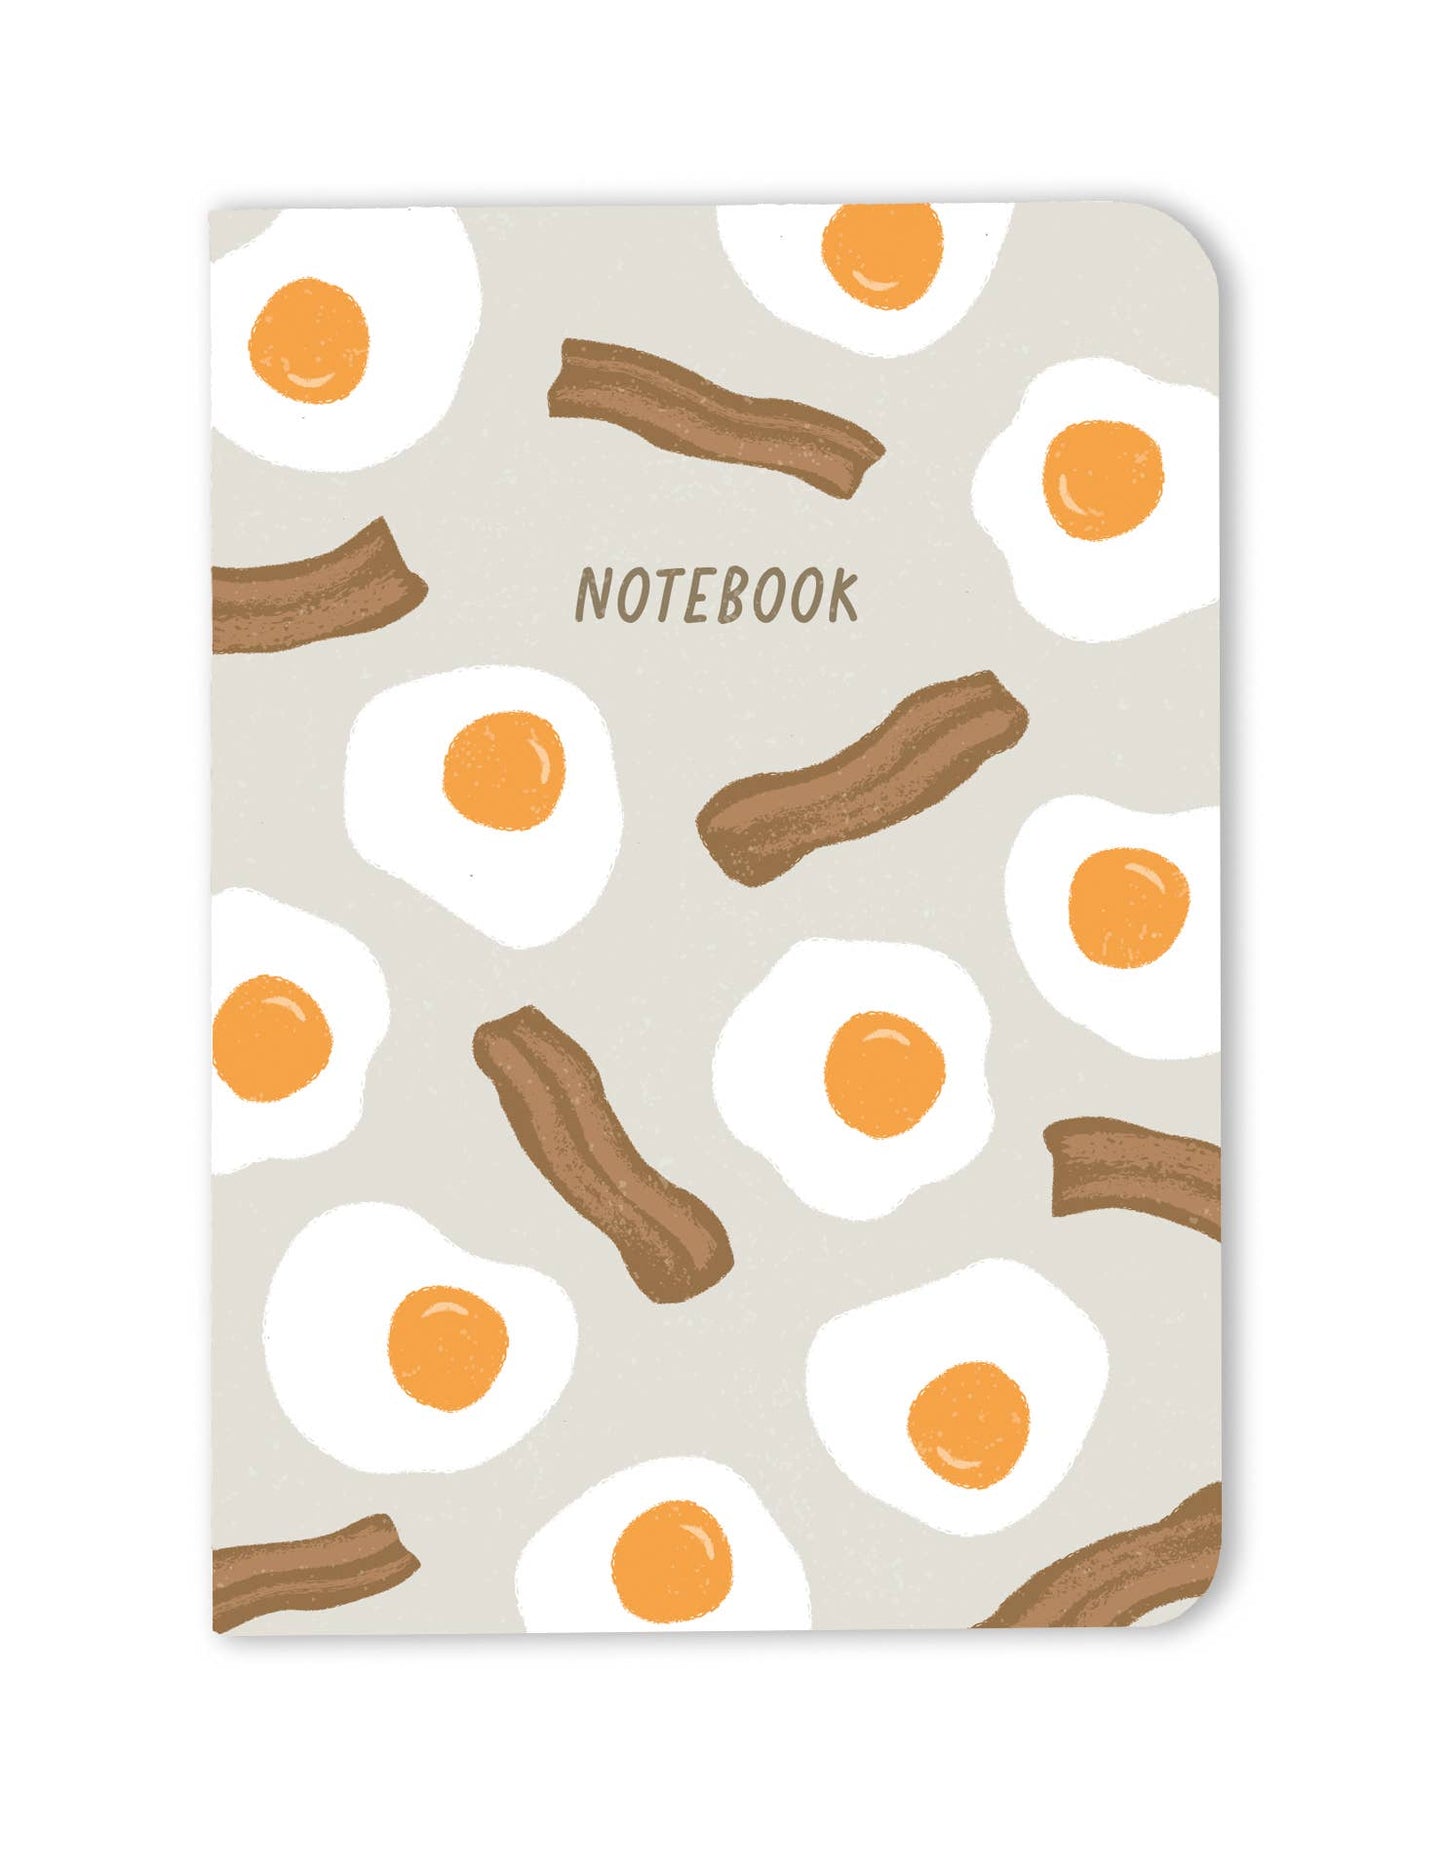 Blank pocket notebook designed with bacon and eggs on the front 